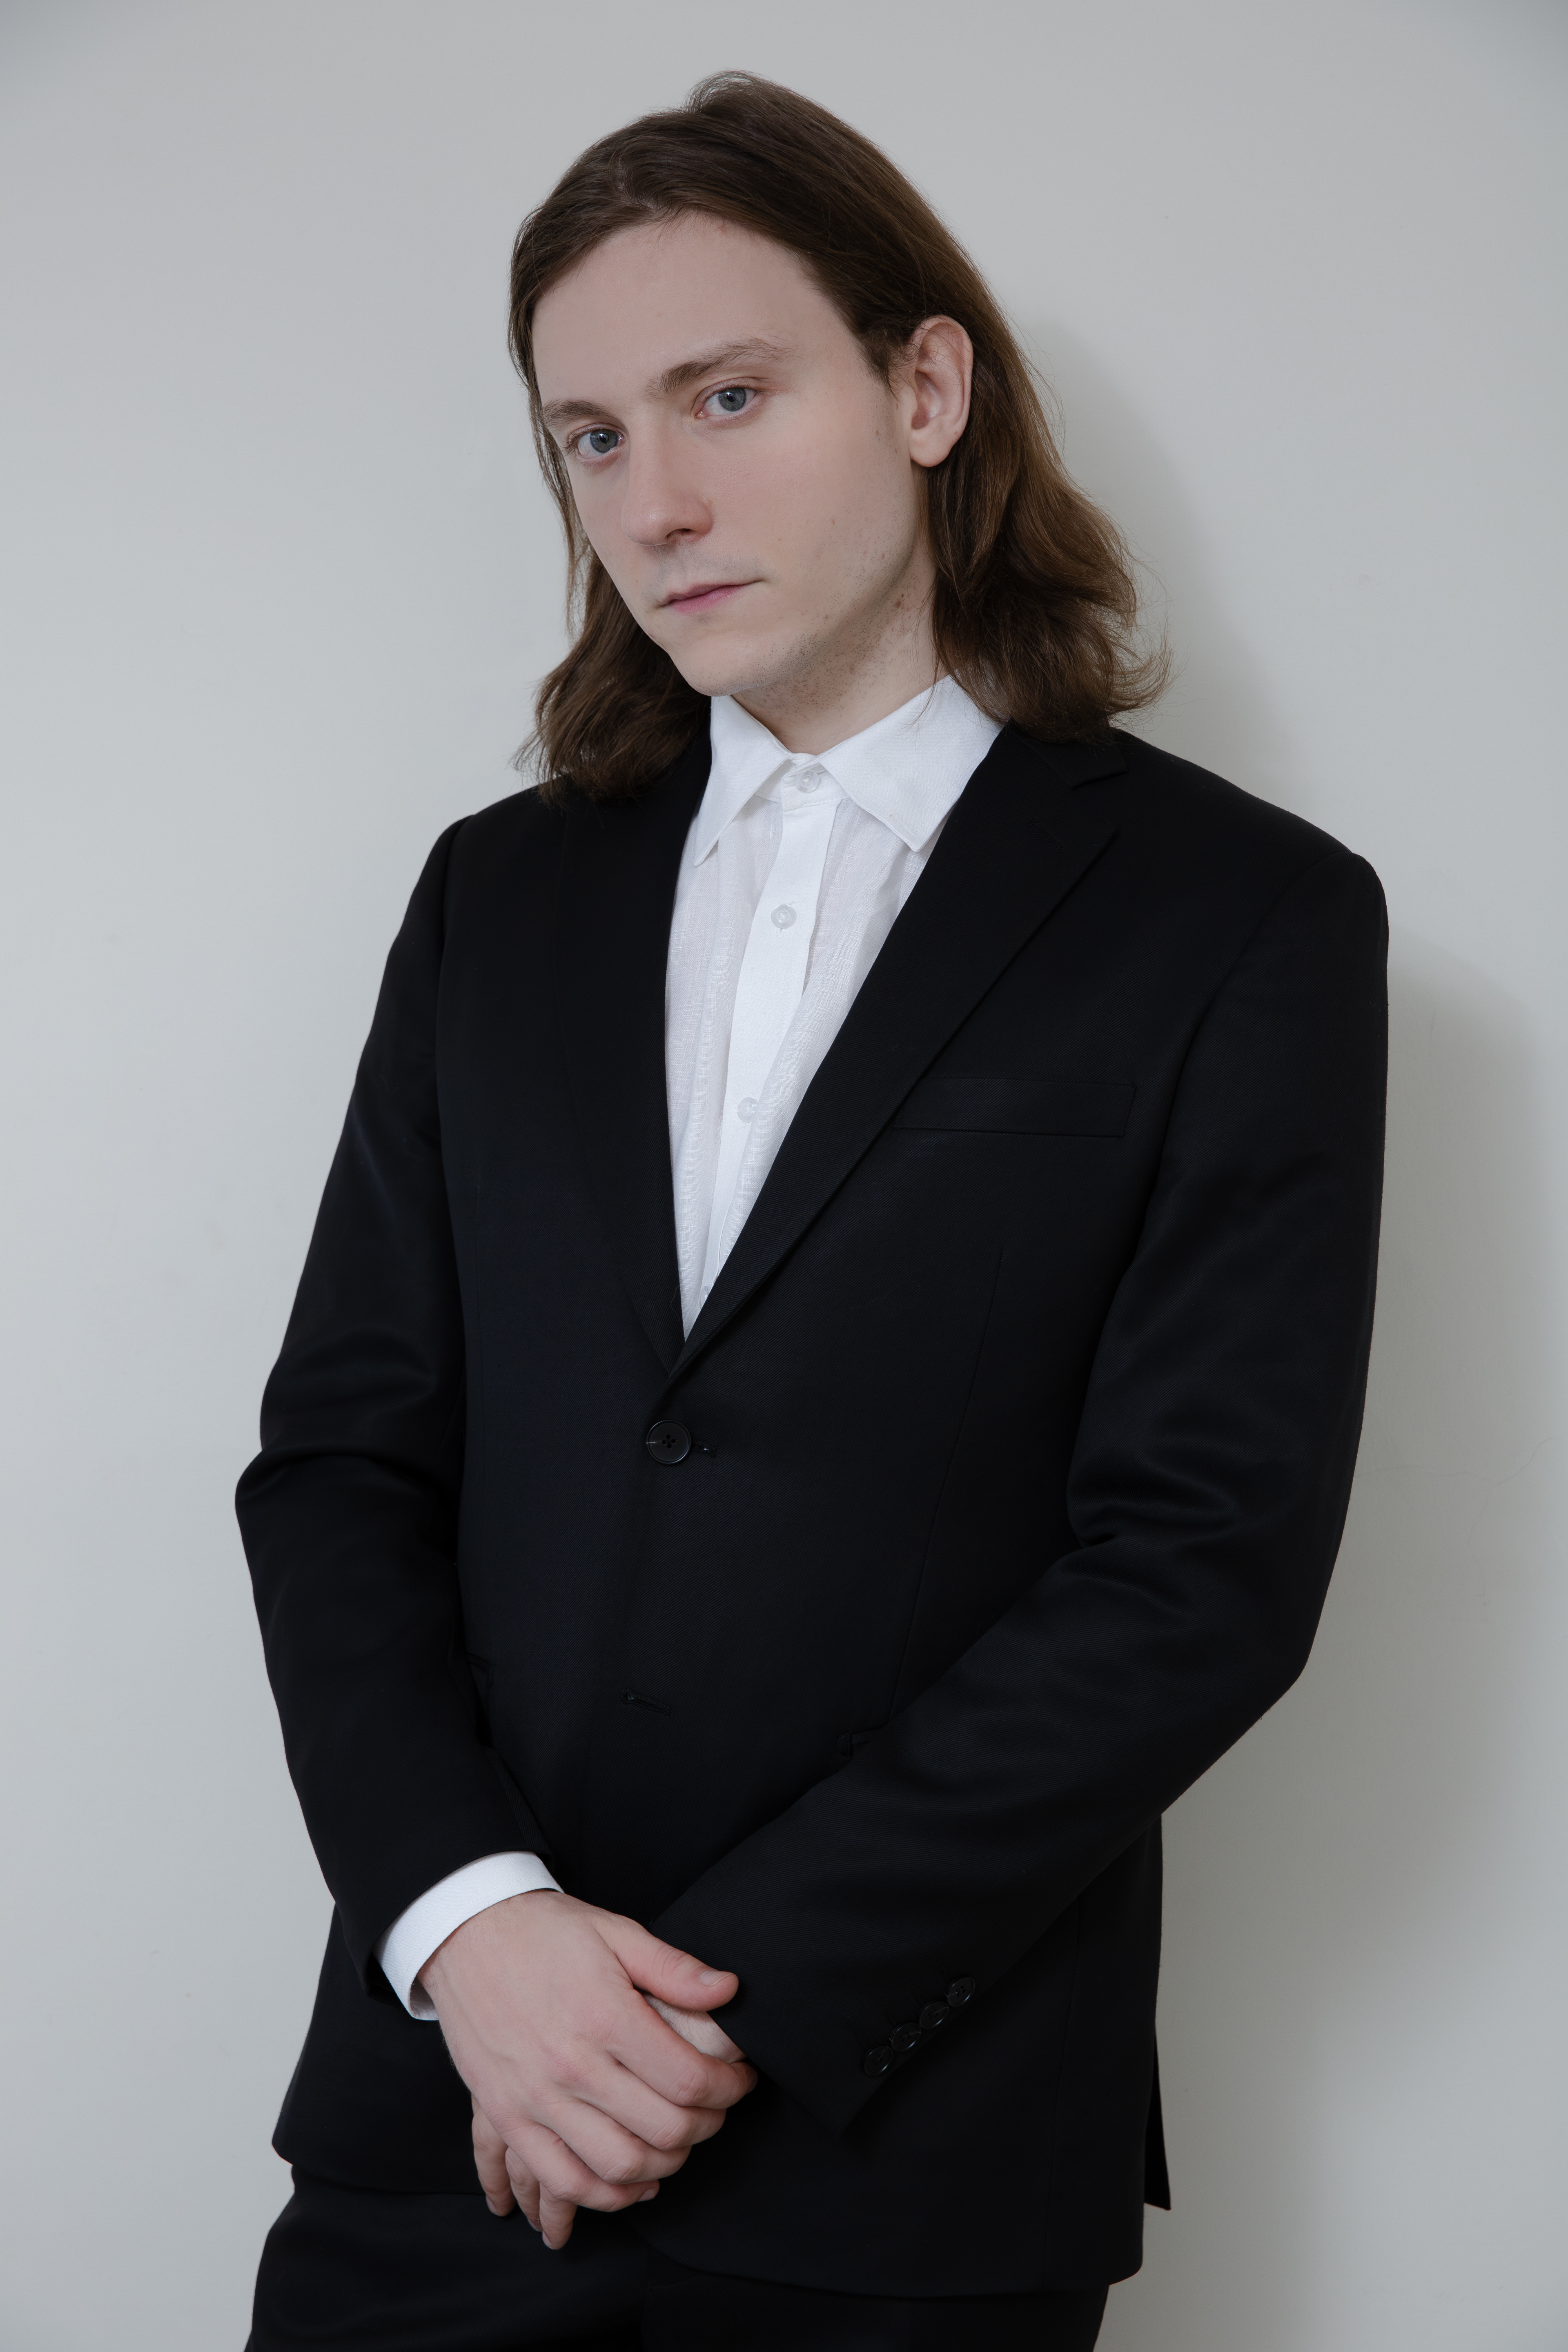 Man with long hair in a black suit and white shirt, hands clasped in front, against a white background.